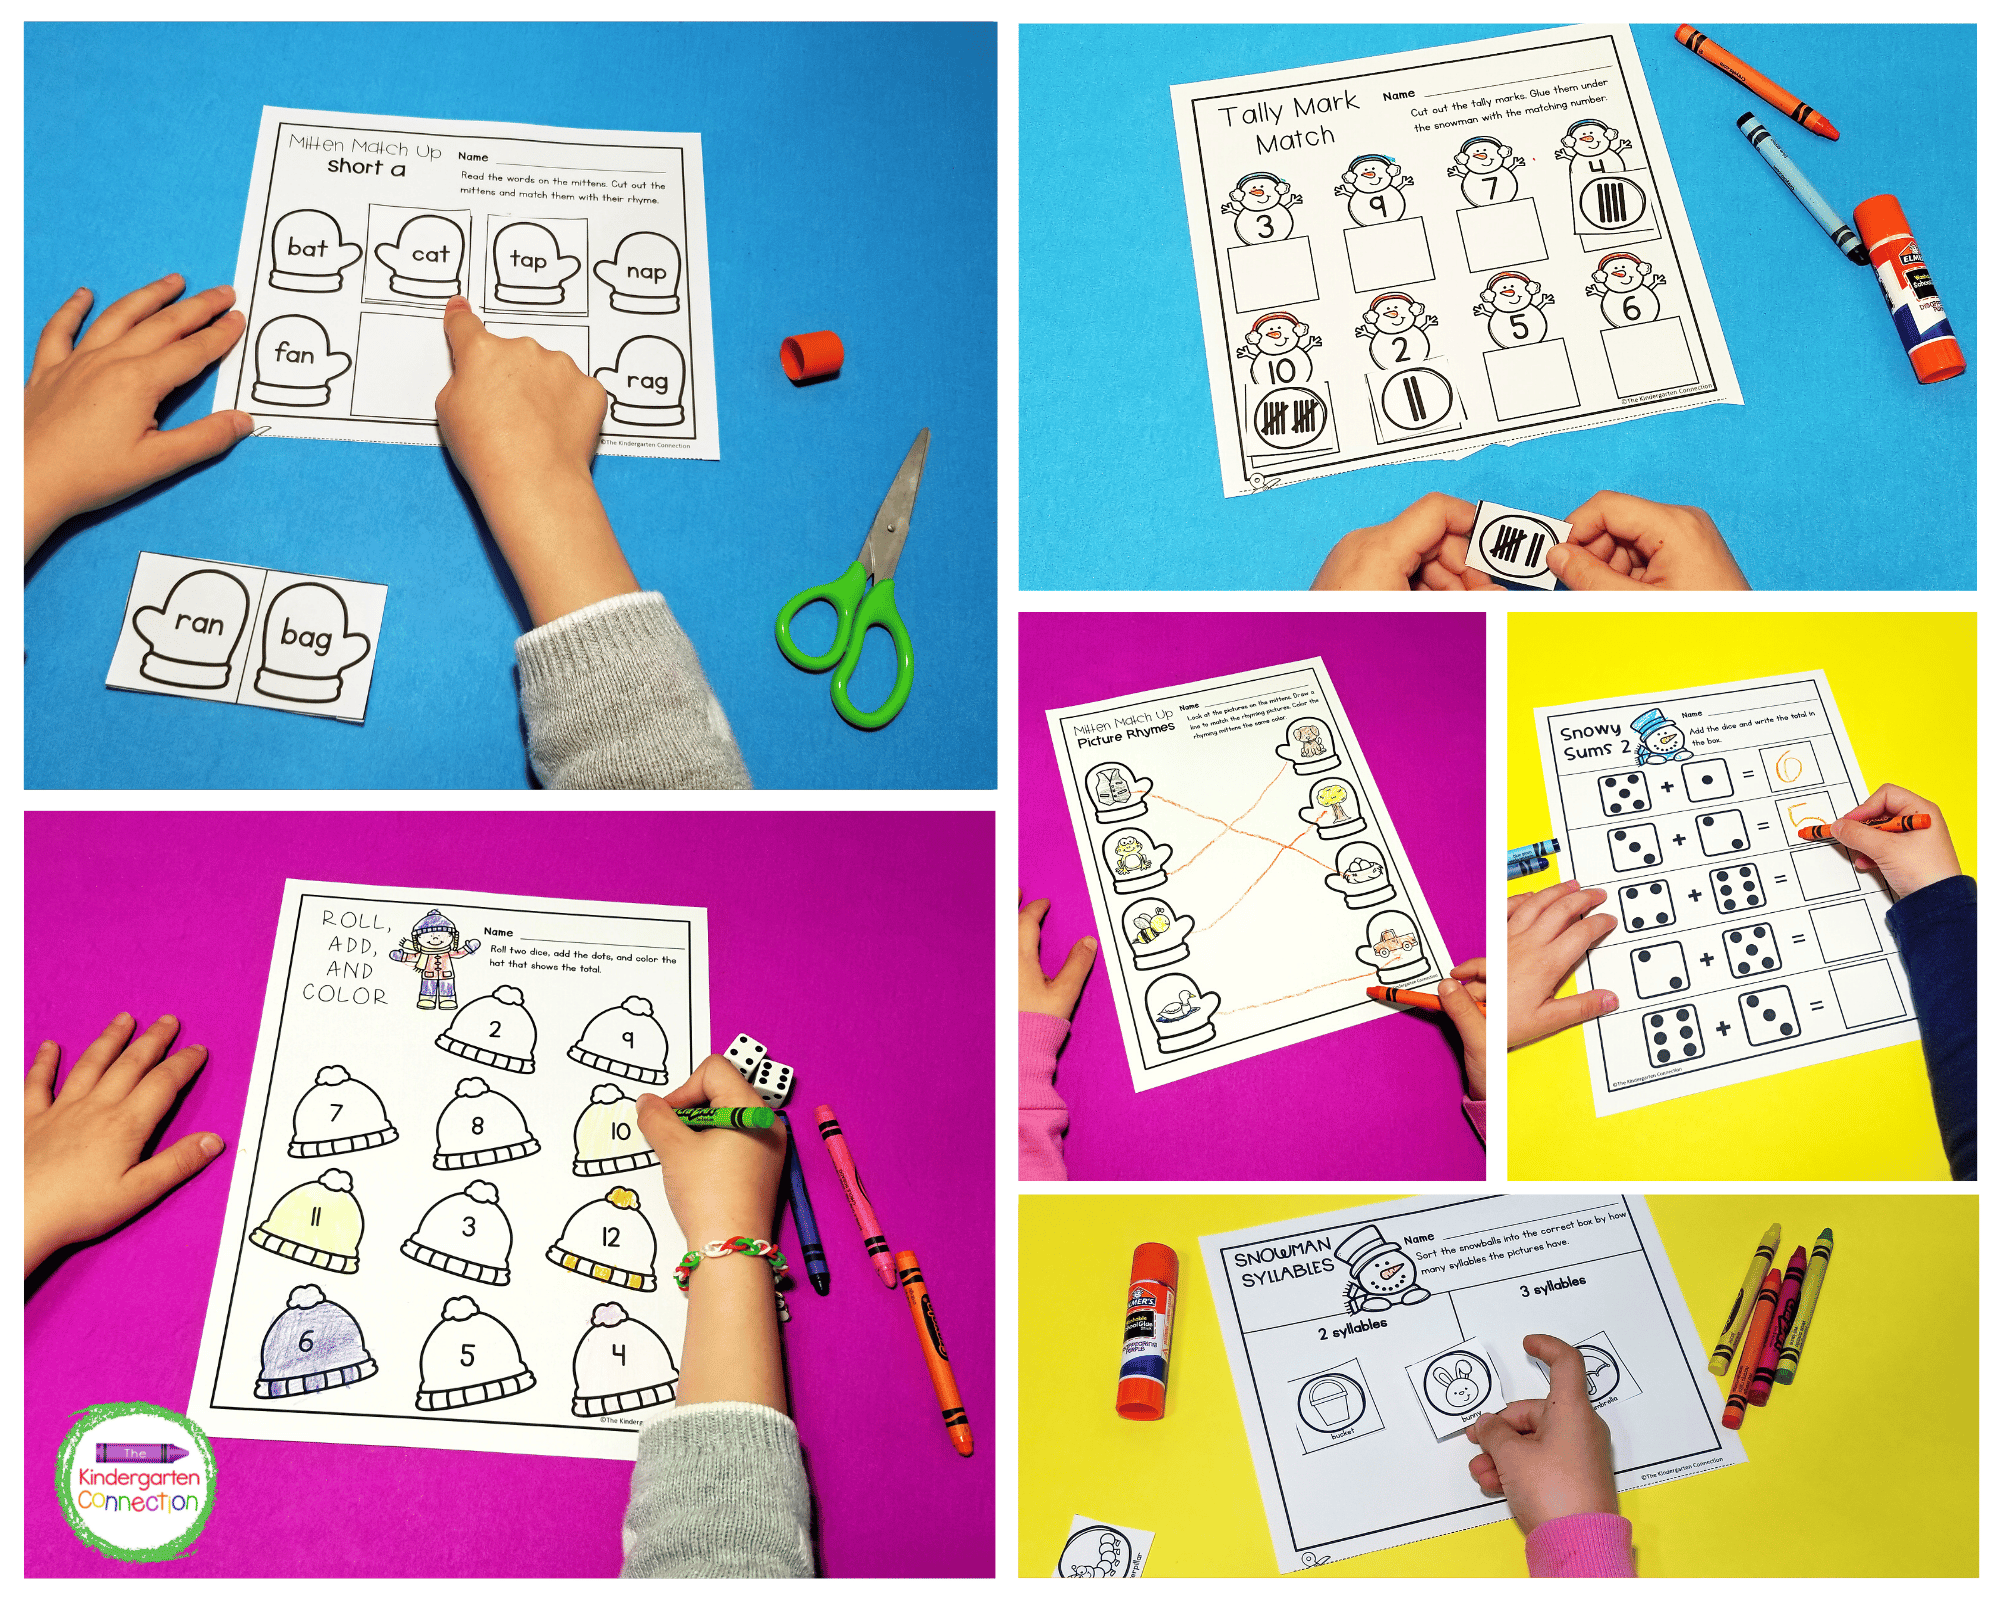 This resource pack contains 40 no-prep math and literacy printables that are ready in a pinch.